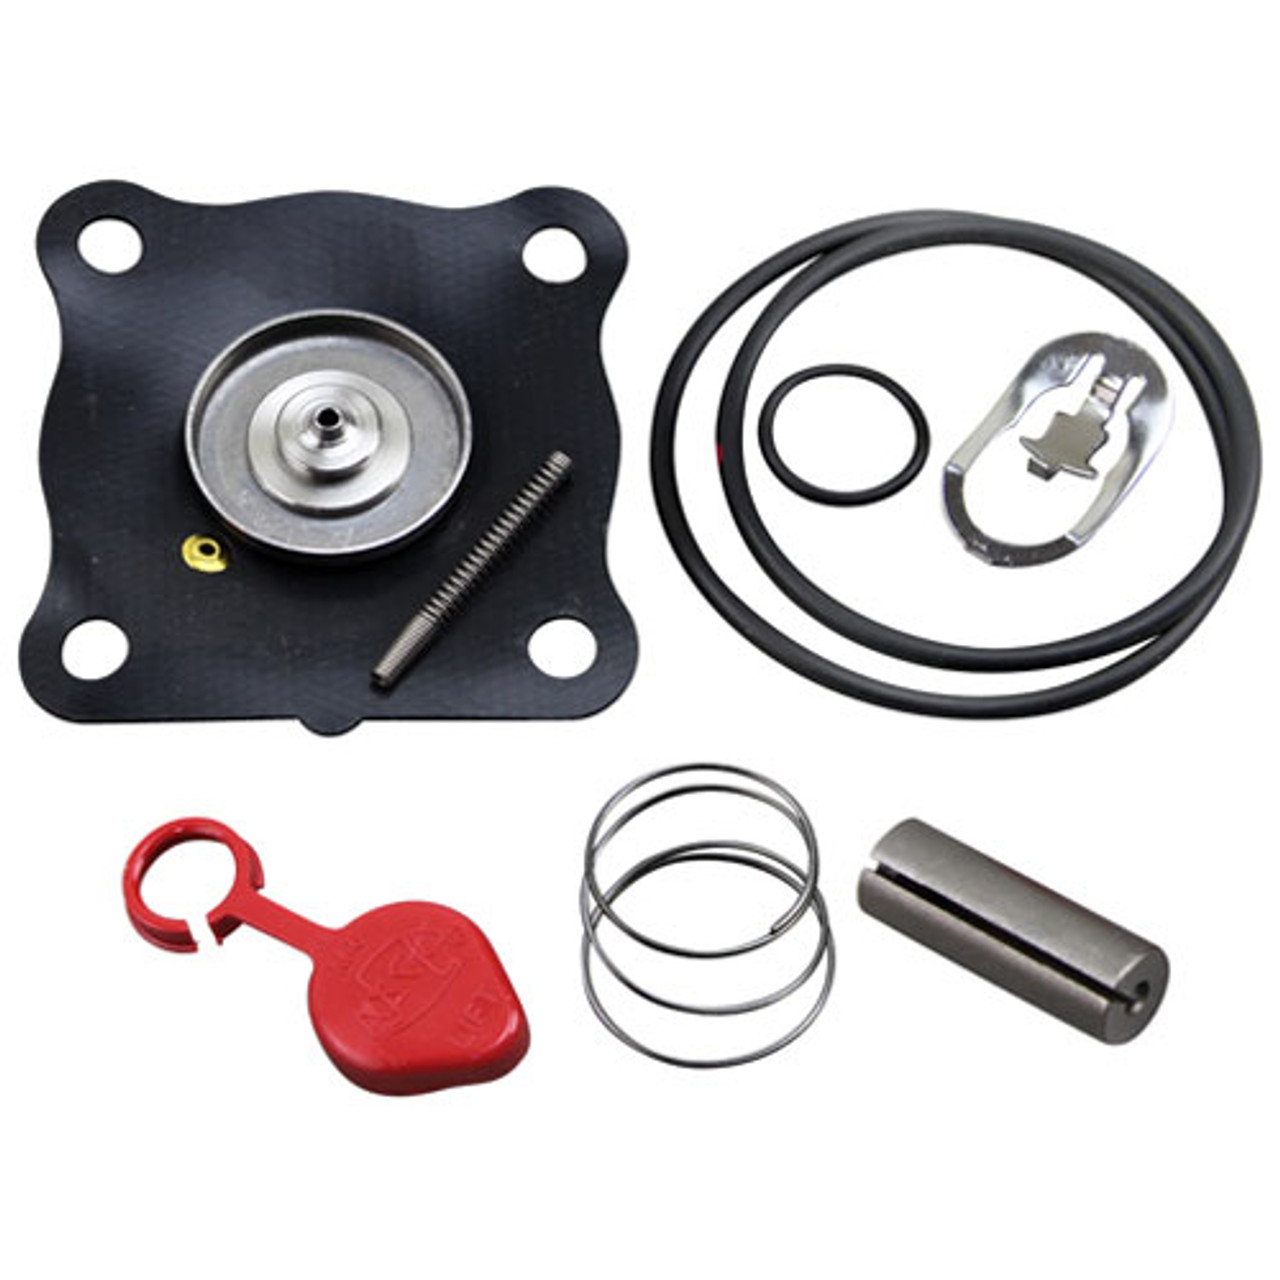 Repair Kit - Replacement Part For Cleveland SE50407